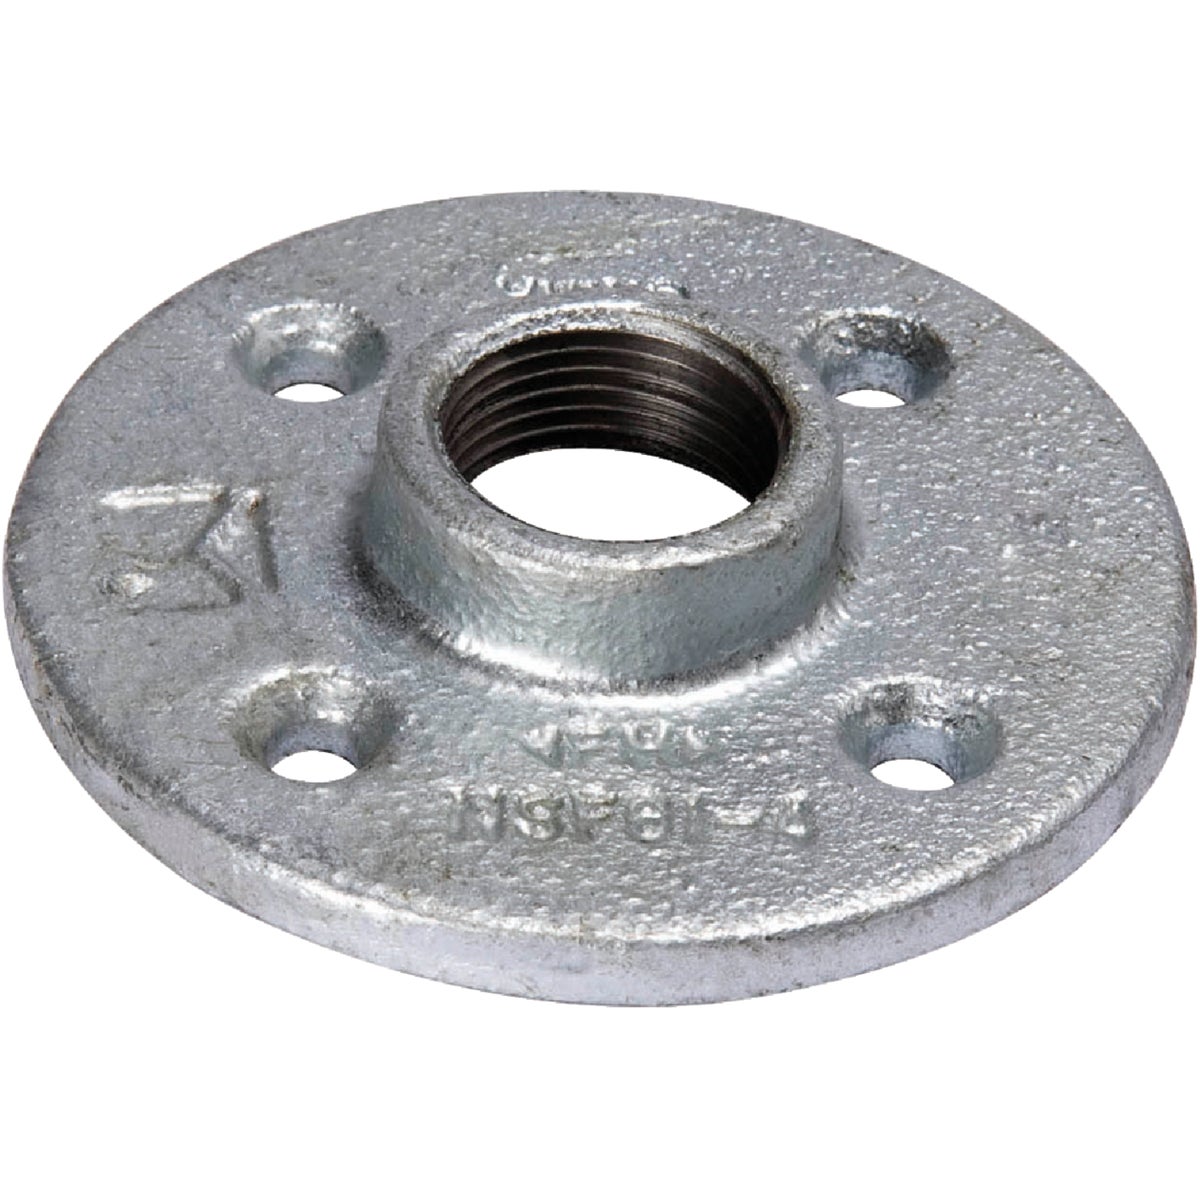 Southland 1-1/2 In. Malleable Iron Galvanized Floor Flange